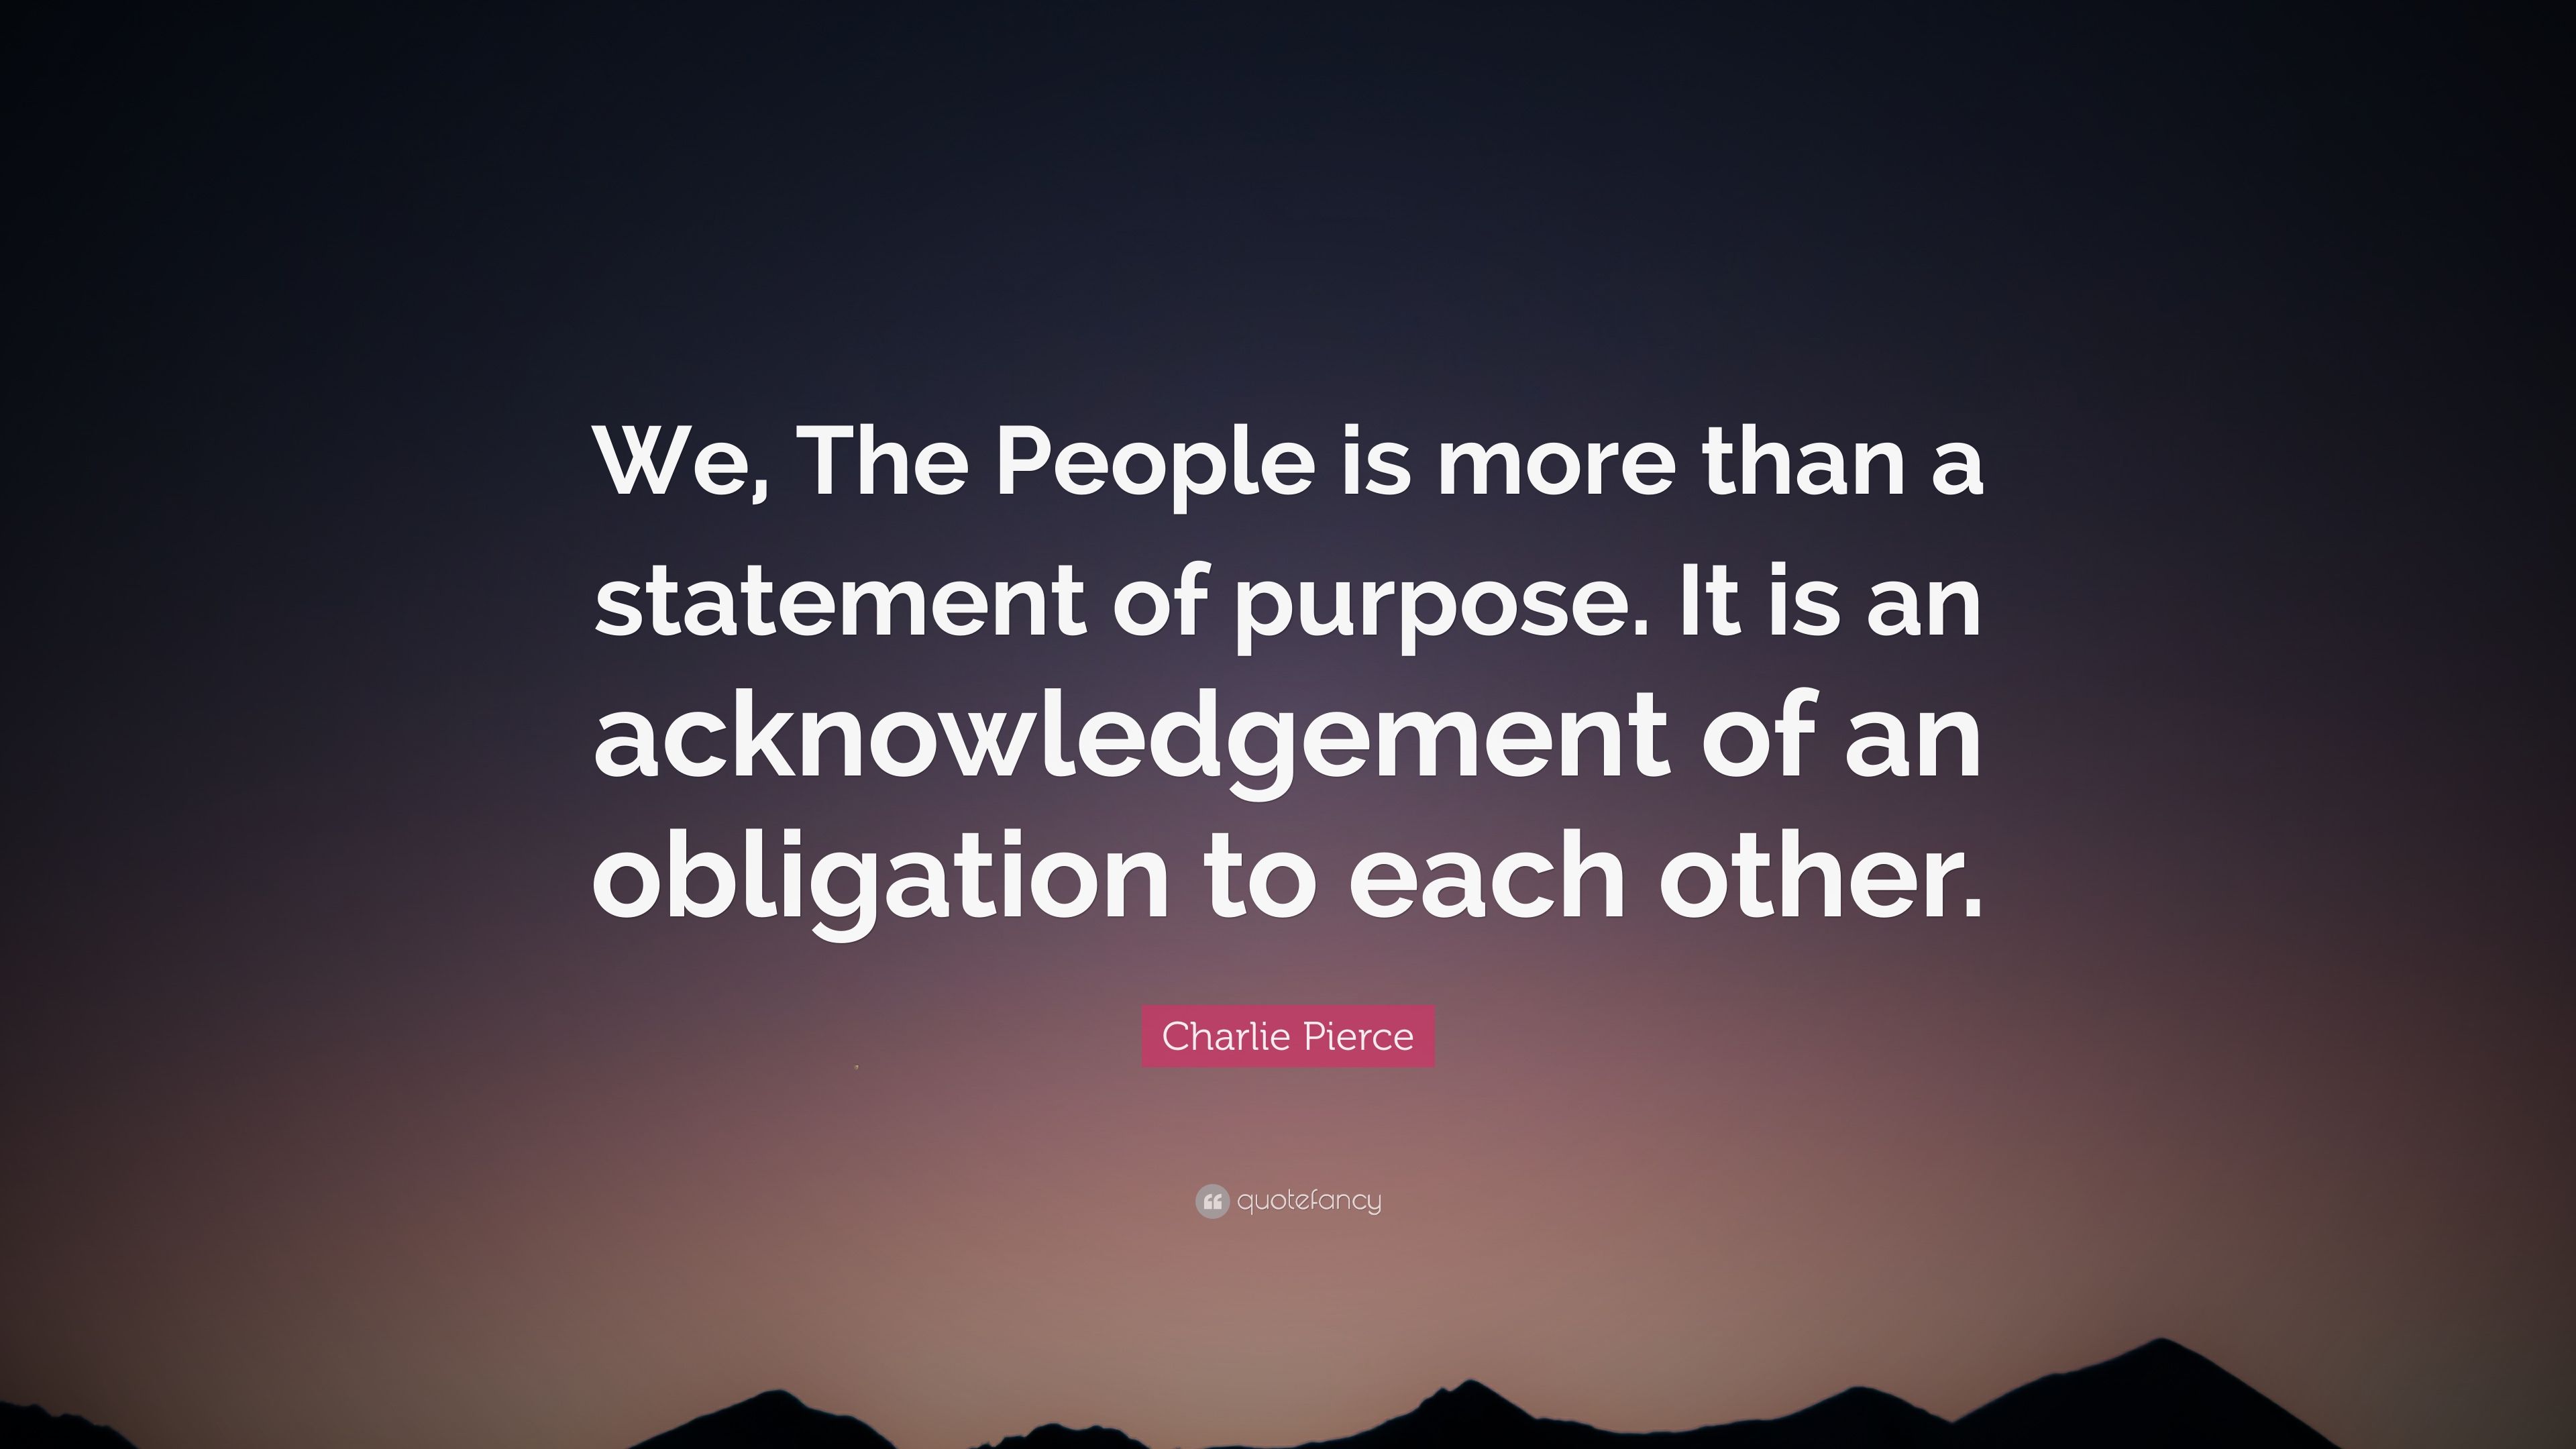 Charlie Pierce Quote: “We, The People is more than a statement